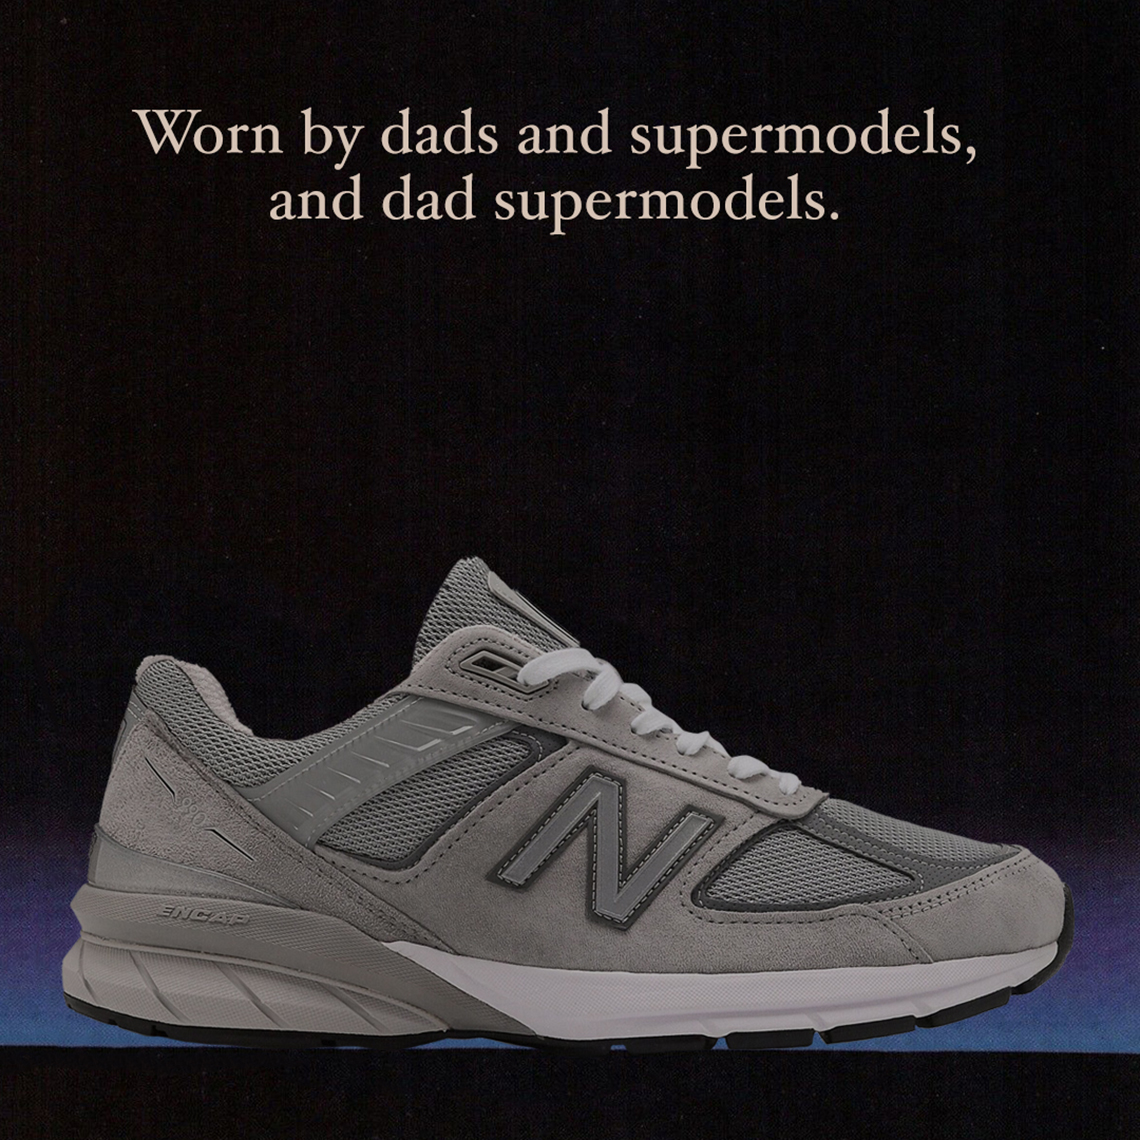 The Best New Balance Holiday 2020 Shopping Guide - SneakerNews.com